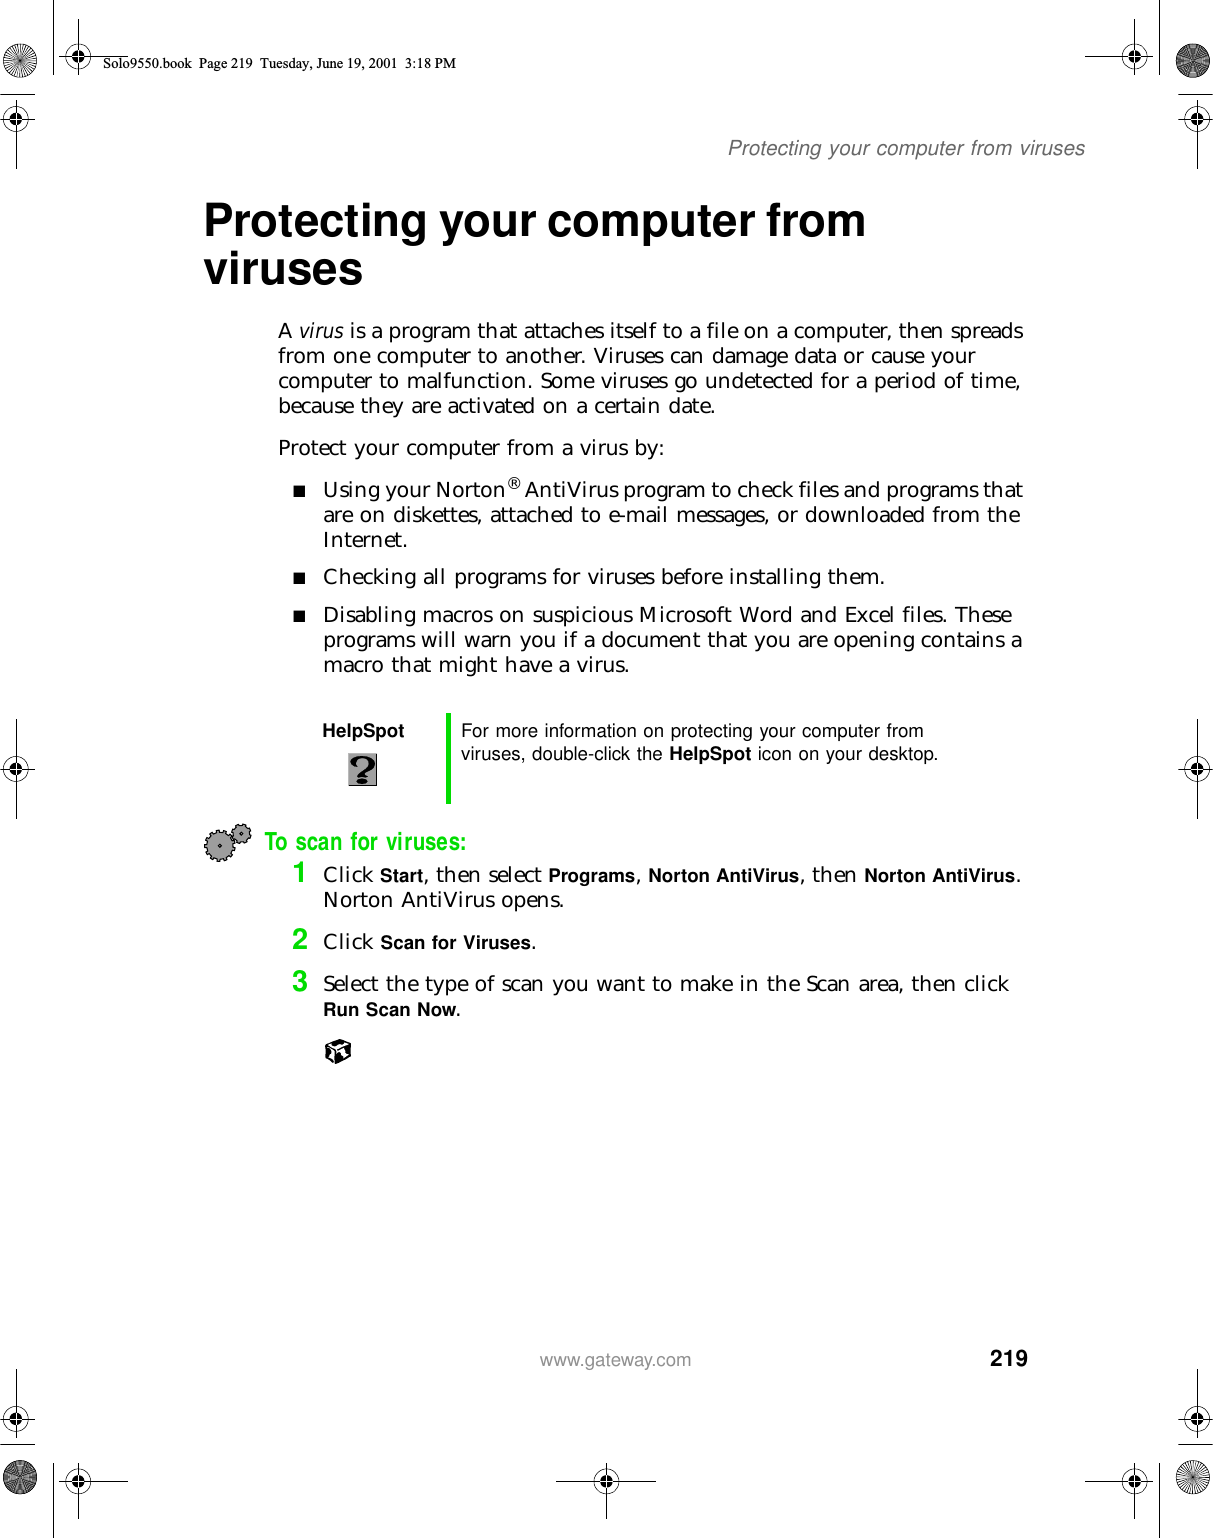 219Protecting your computer from viruseswww.gateway.comProtecting your computer from virusesA virus is a program that attaches itself to a file on a computer, then spreads from one computer to another. Viruses can damage data or cause your computer to malfunction. Some viruses go undetected for a period of time, because they are activated on a certain date.Protect your computer from a virus by:■Using your Norton® AntiVirus program to check files and programs that are on diskettes, attached to e-mail messages, or downloaded from the Internet.■Checking all programs for viruses before installing them.■Disabling macros on suspicious Microsoft Word and Excel files. These programs will warn you if a document that you are opening contains a macro that might have a virus.To scan for viruses: 1Click Start, then select Programs, Norton AntiVirus, then Norton AntiVirus. Norton AntiVirus opens.2Click Scan for Viruses.3Select the type of scan you want to make in the Scan area, then click Run Scan Now.HelpSpot For more information on protecting your computer from viruses, double-click the HelpSpot icon on your desktop.Solo9550.book Page 219 Tuesday, June 19, 2001 3:18 PM